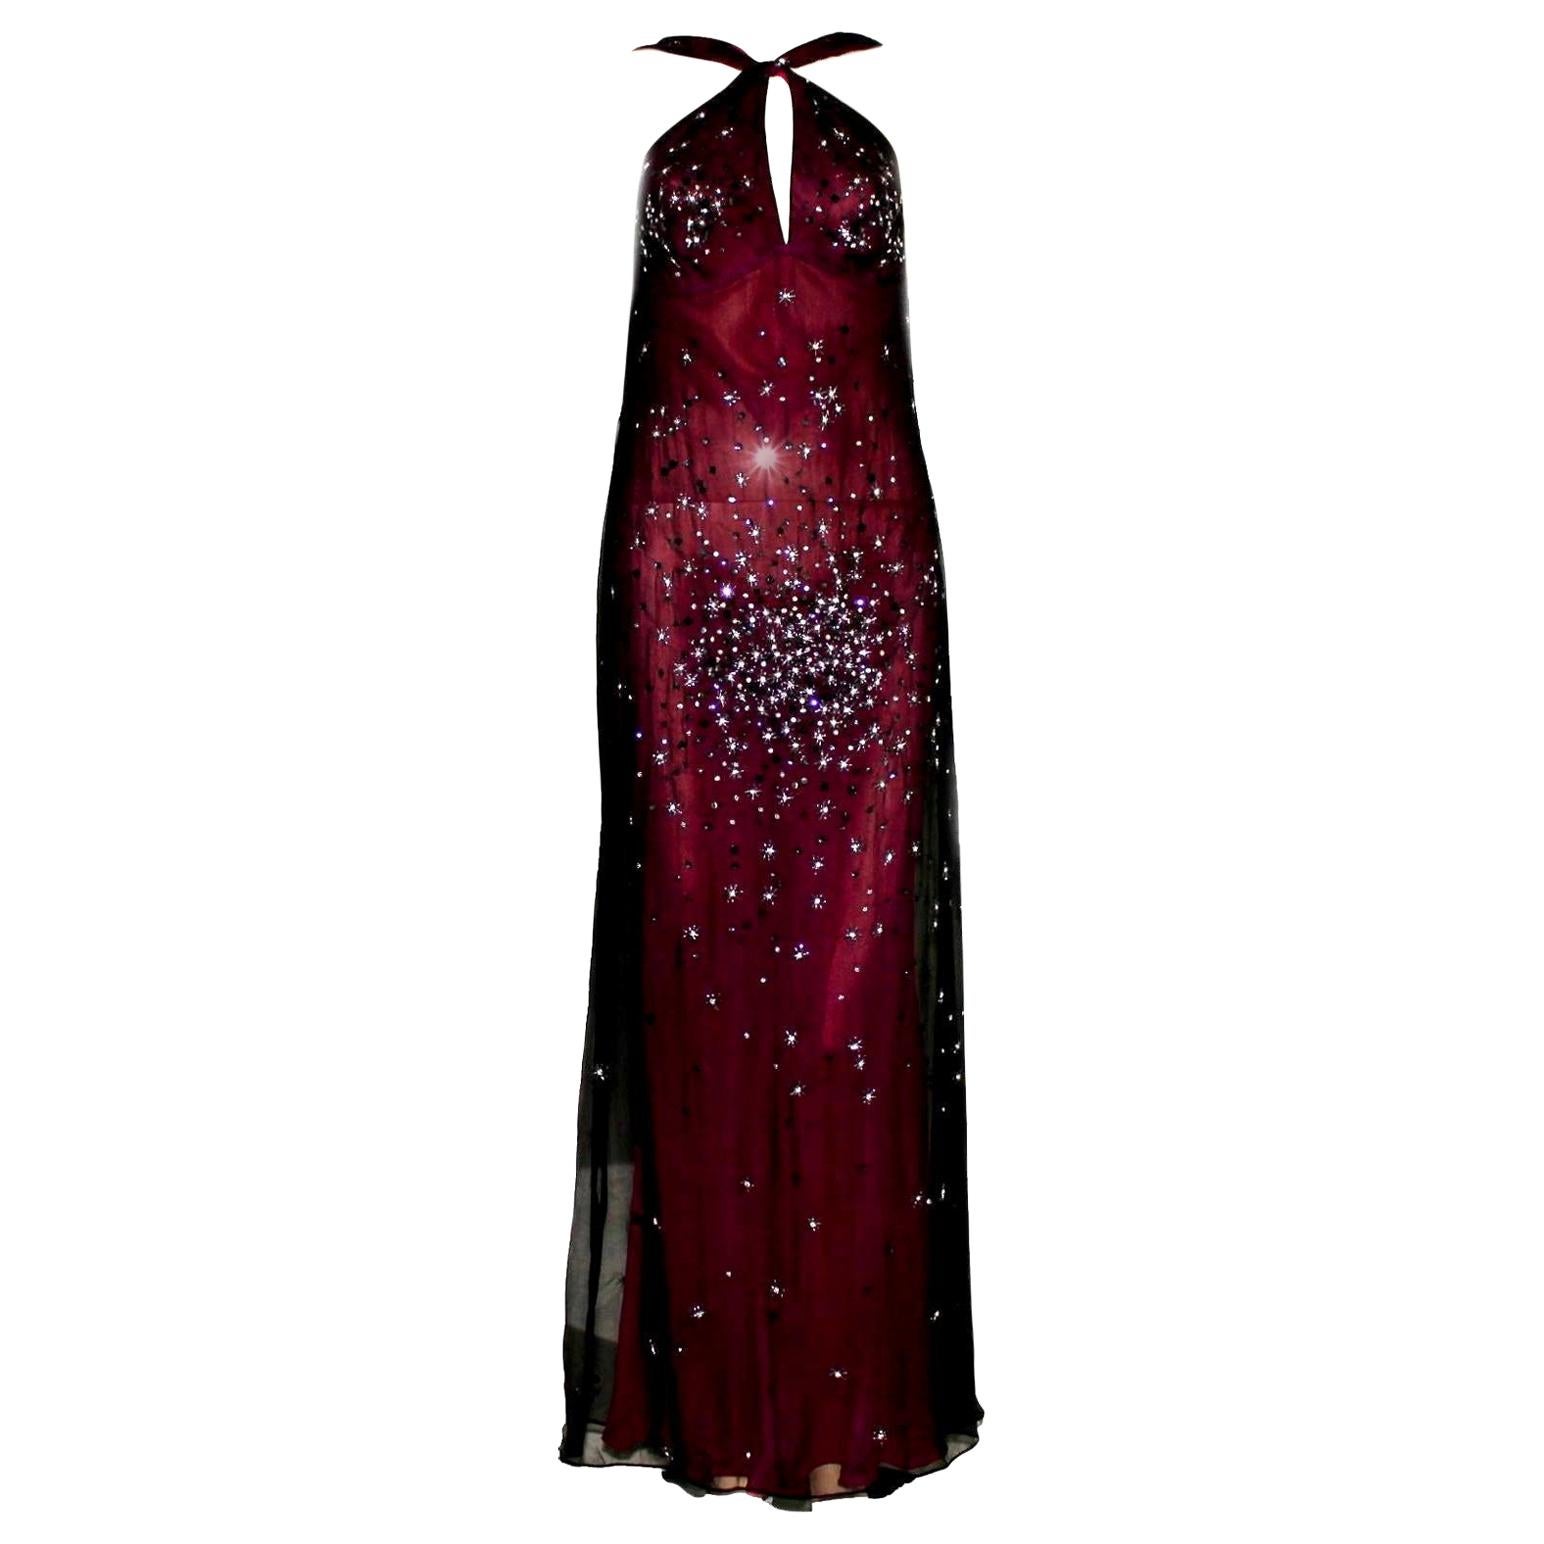 RARE Gianni Versace Couture 1998 Embroidered Evening Dress Gown as on Courtney For Sale